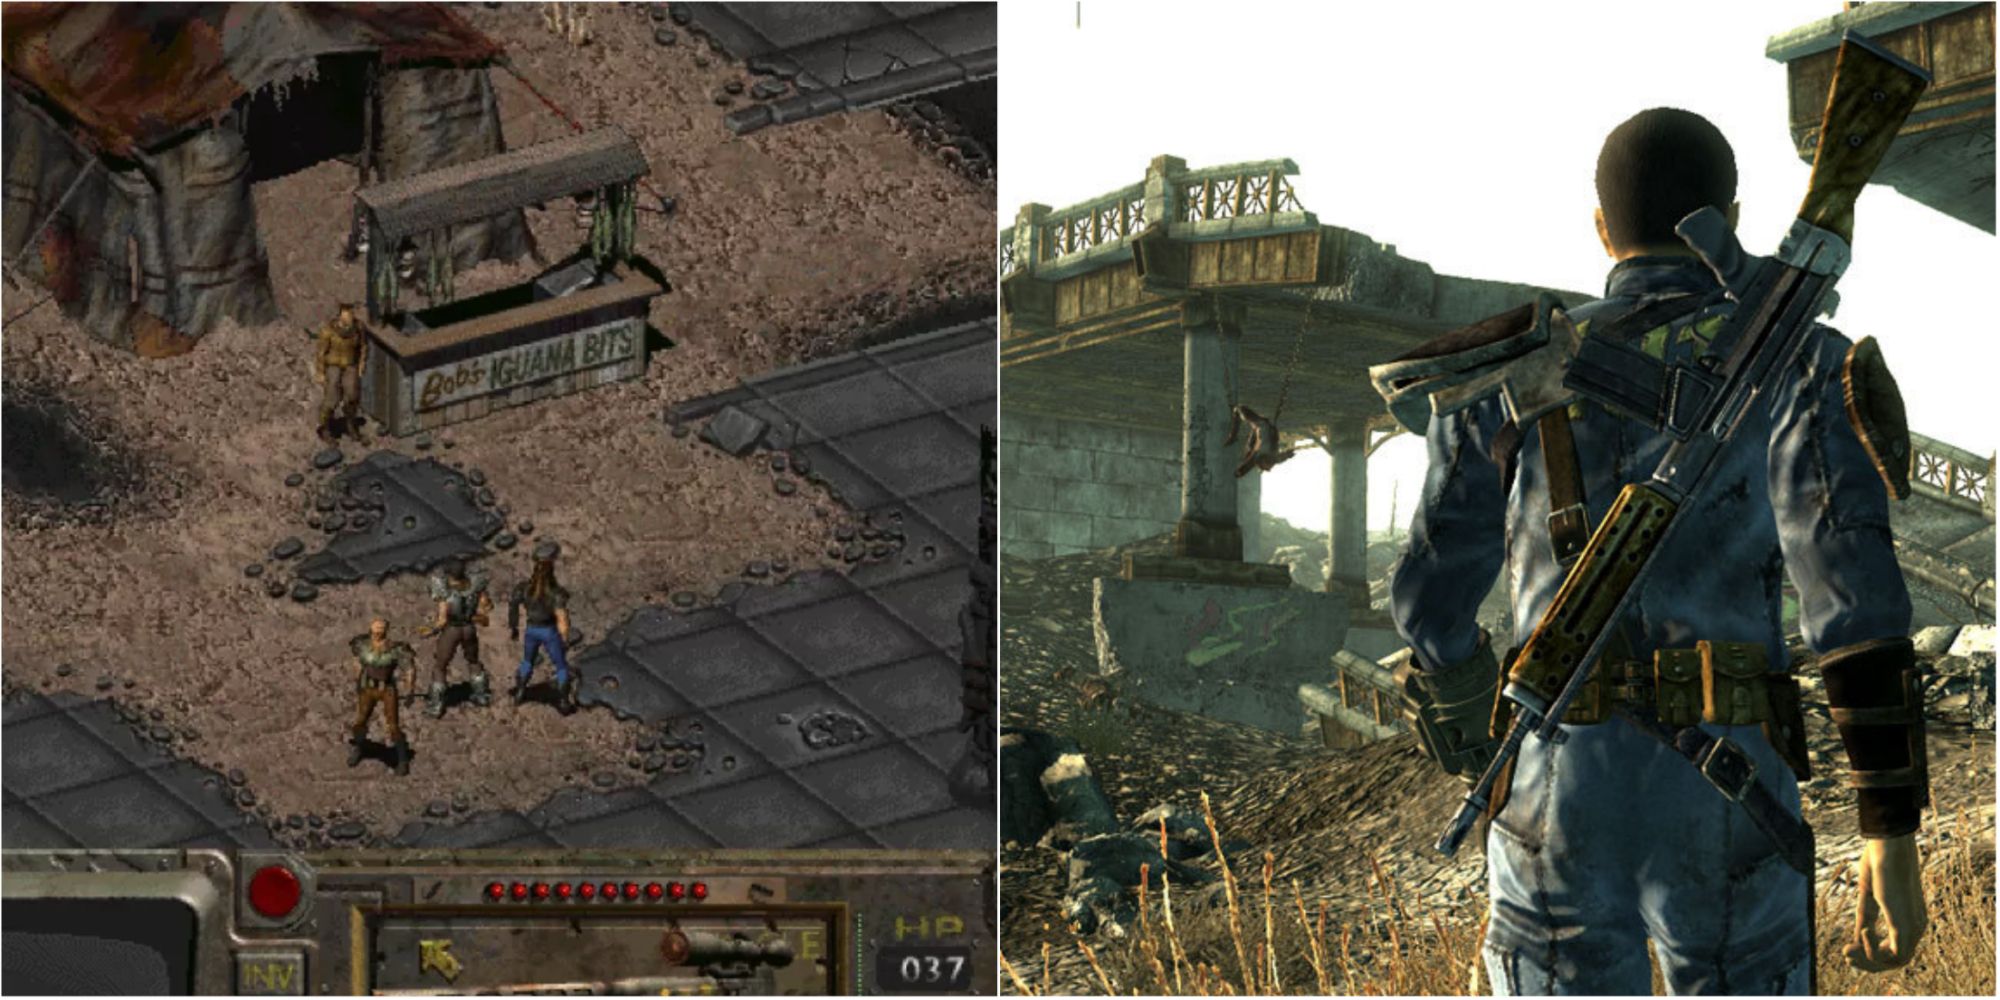 Split Image Fallout 1 and Fallout 3